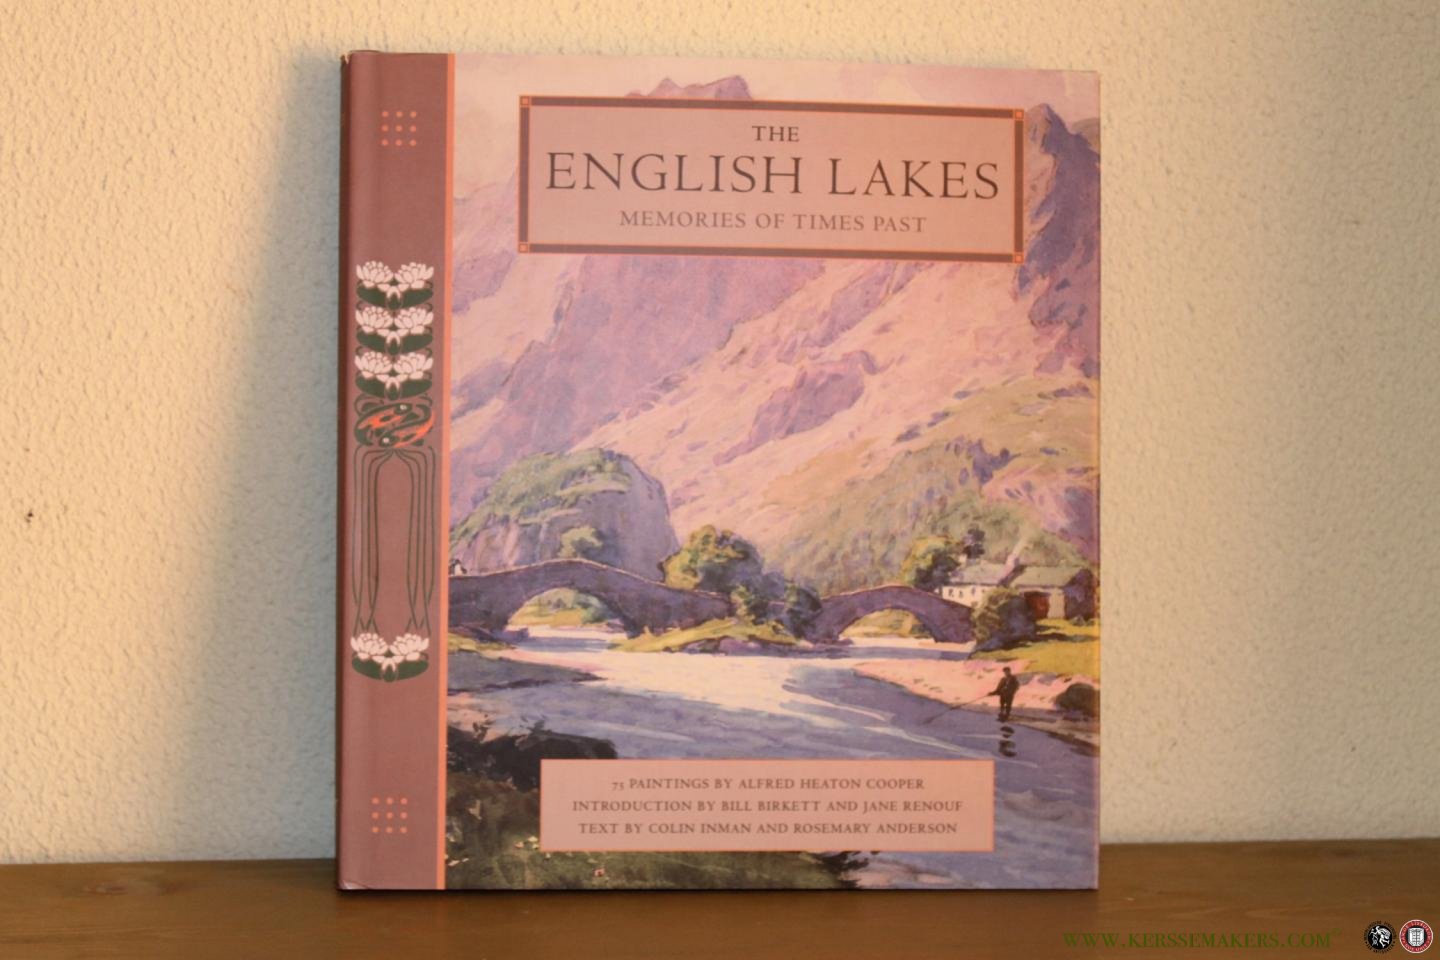 INMAN, Colin / ANDERSON, Rosemary - The English Lakes. Memories of Times Past. 75 paintings by Alfred Heaton Cooper. Introduction by Bill Birkett and Jane Renouf